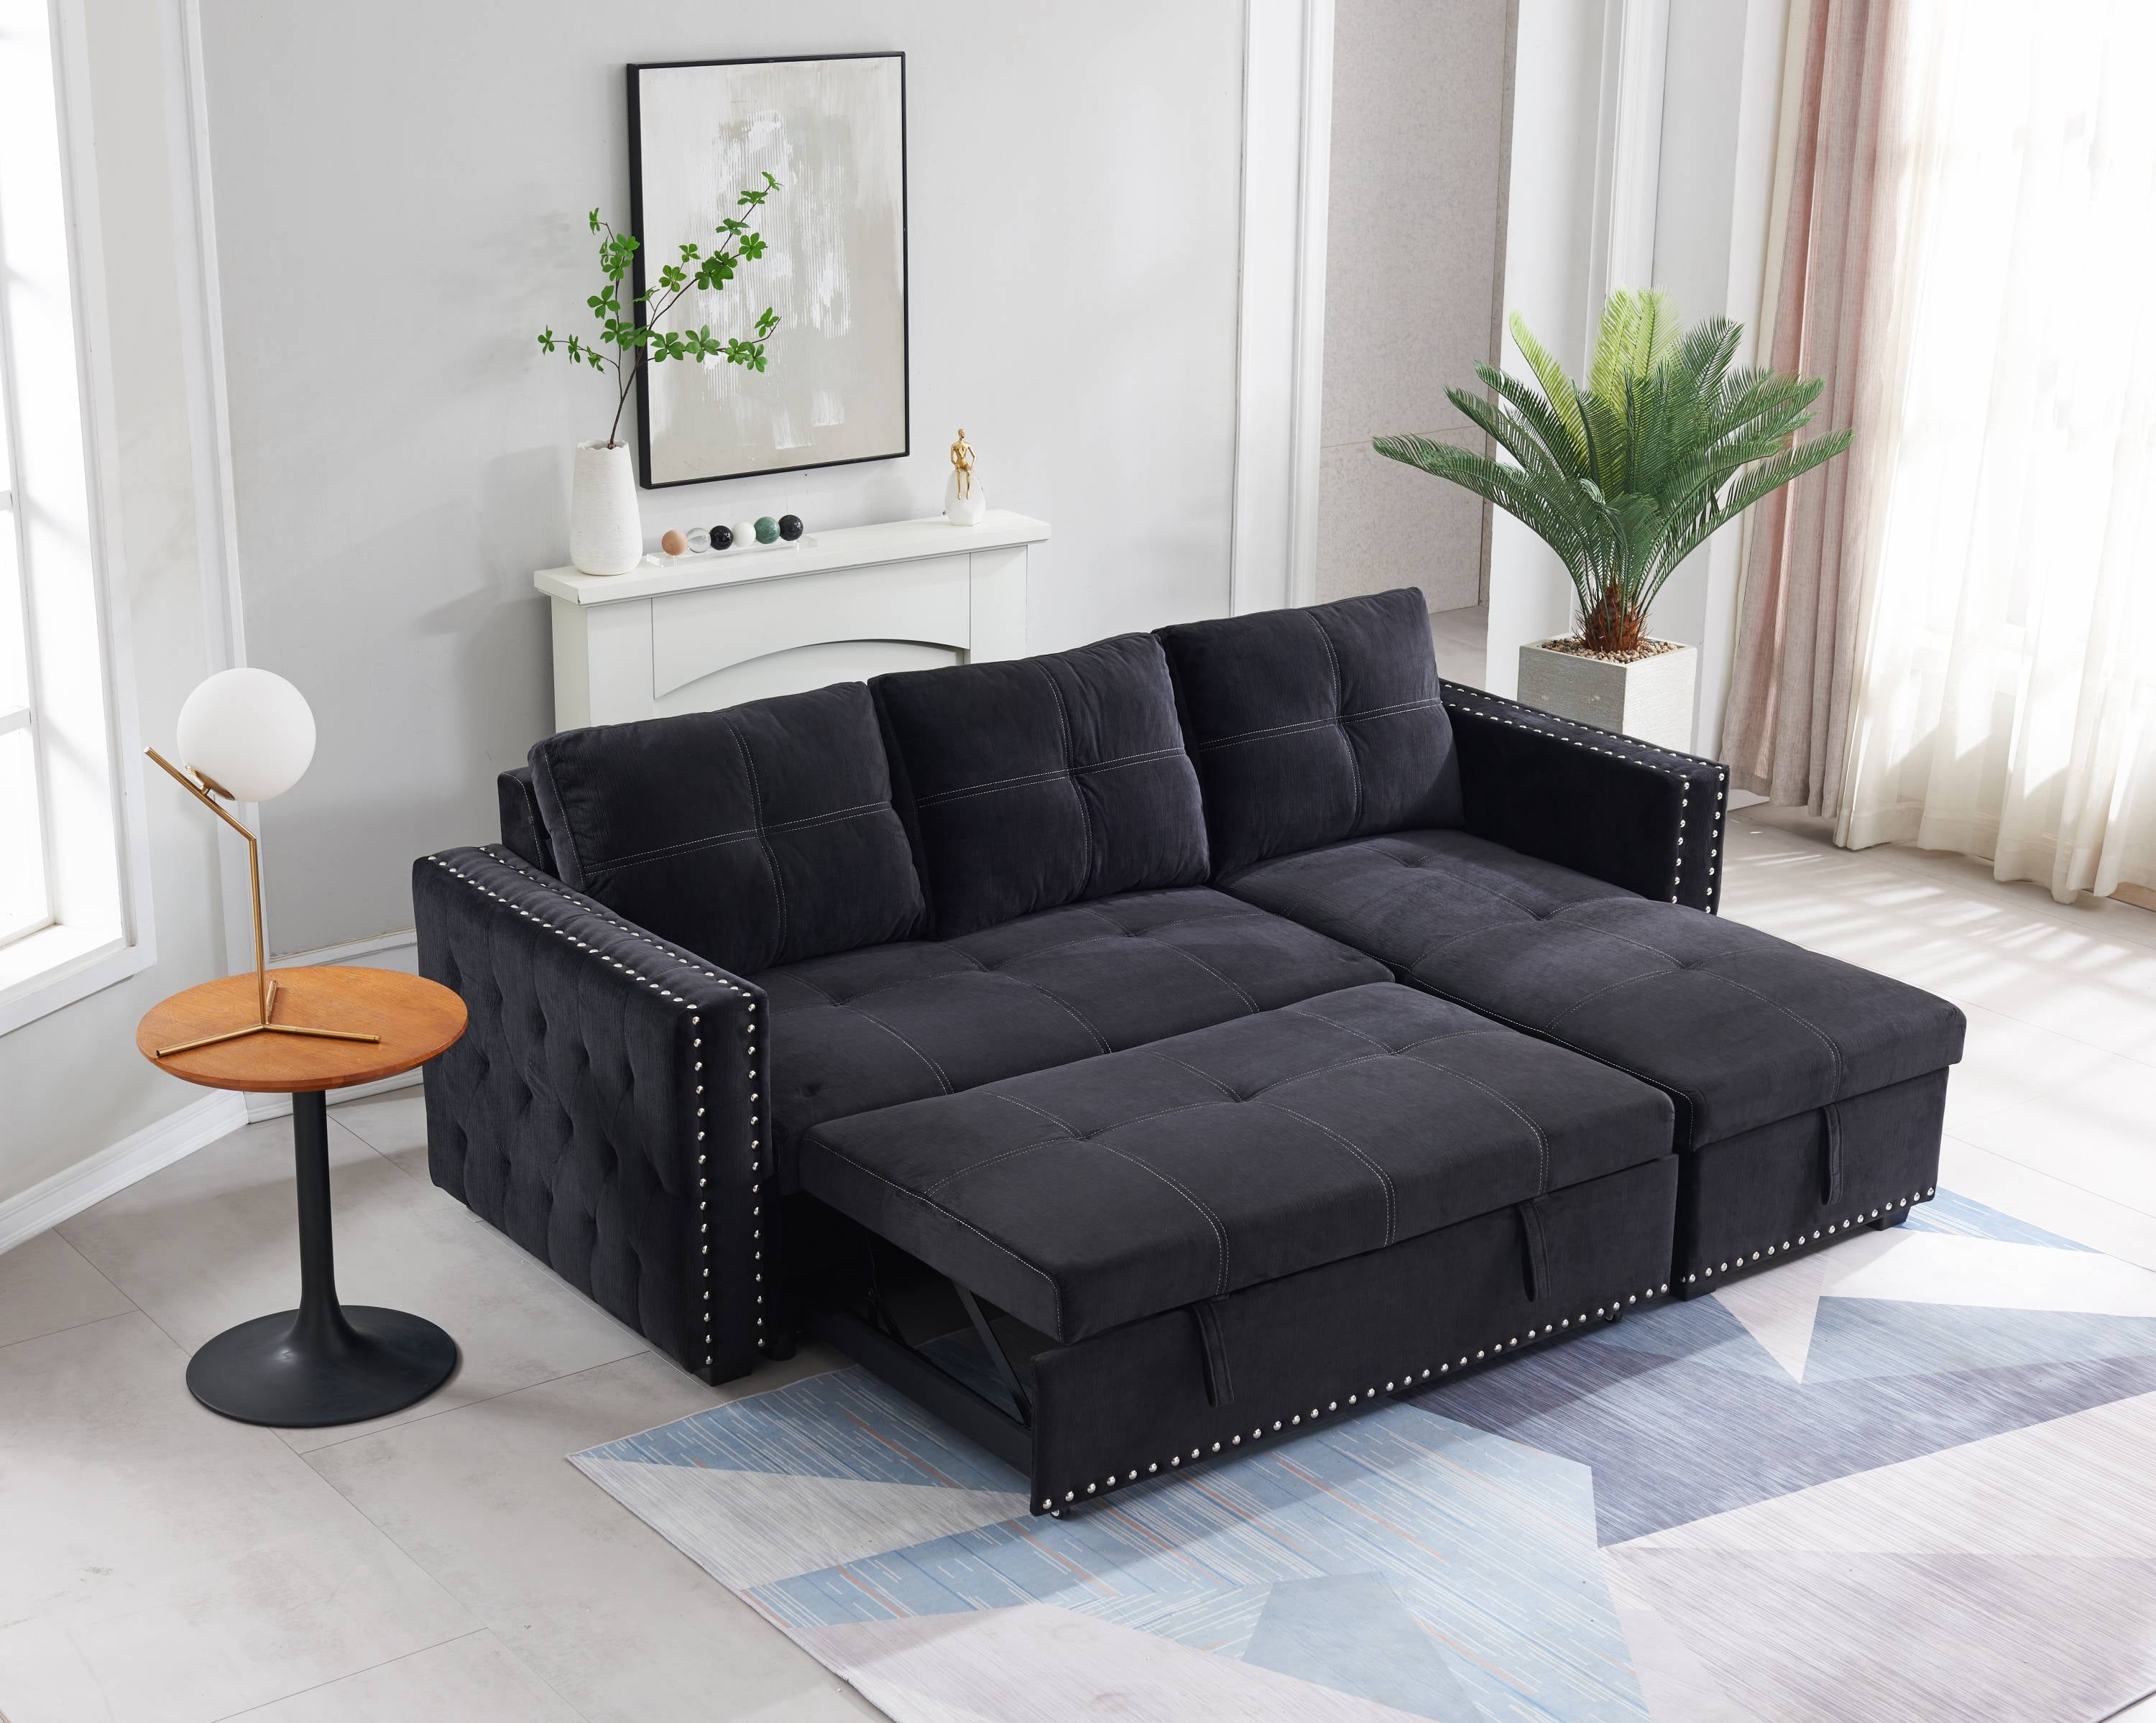 Reversible Sectional Sleeper Sofa, Small Space Living Room Sofa Bed